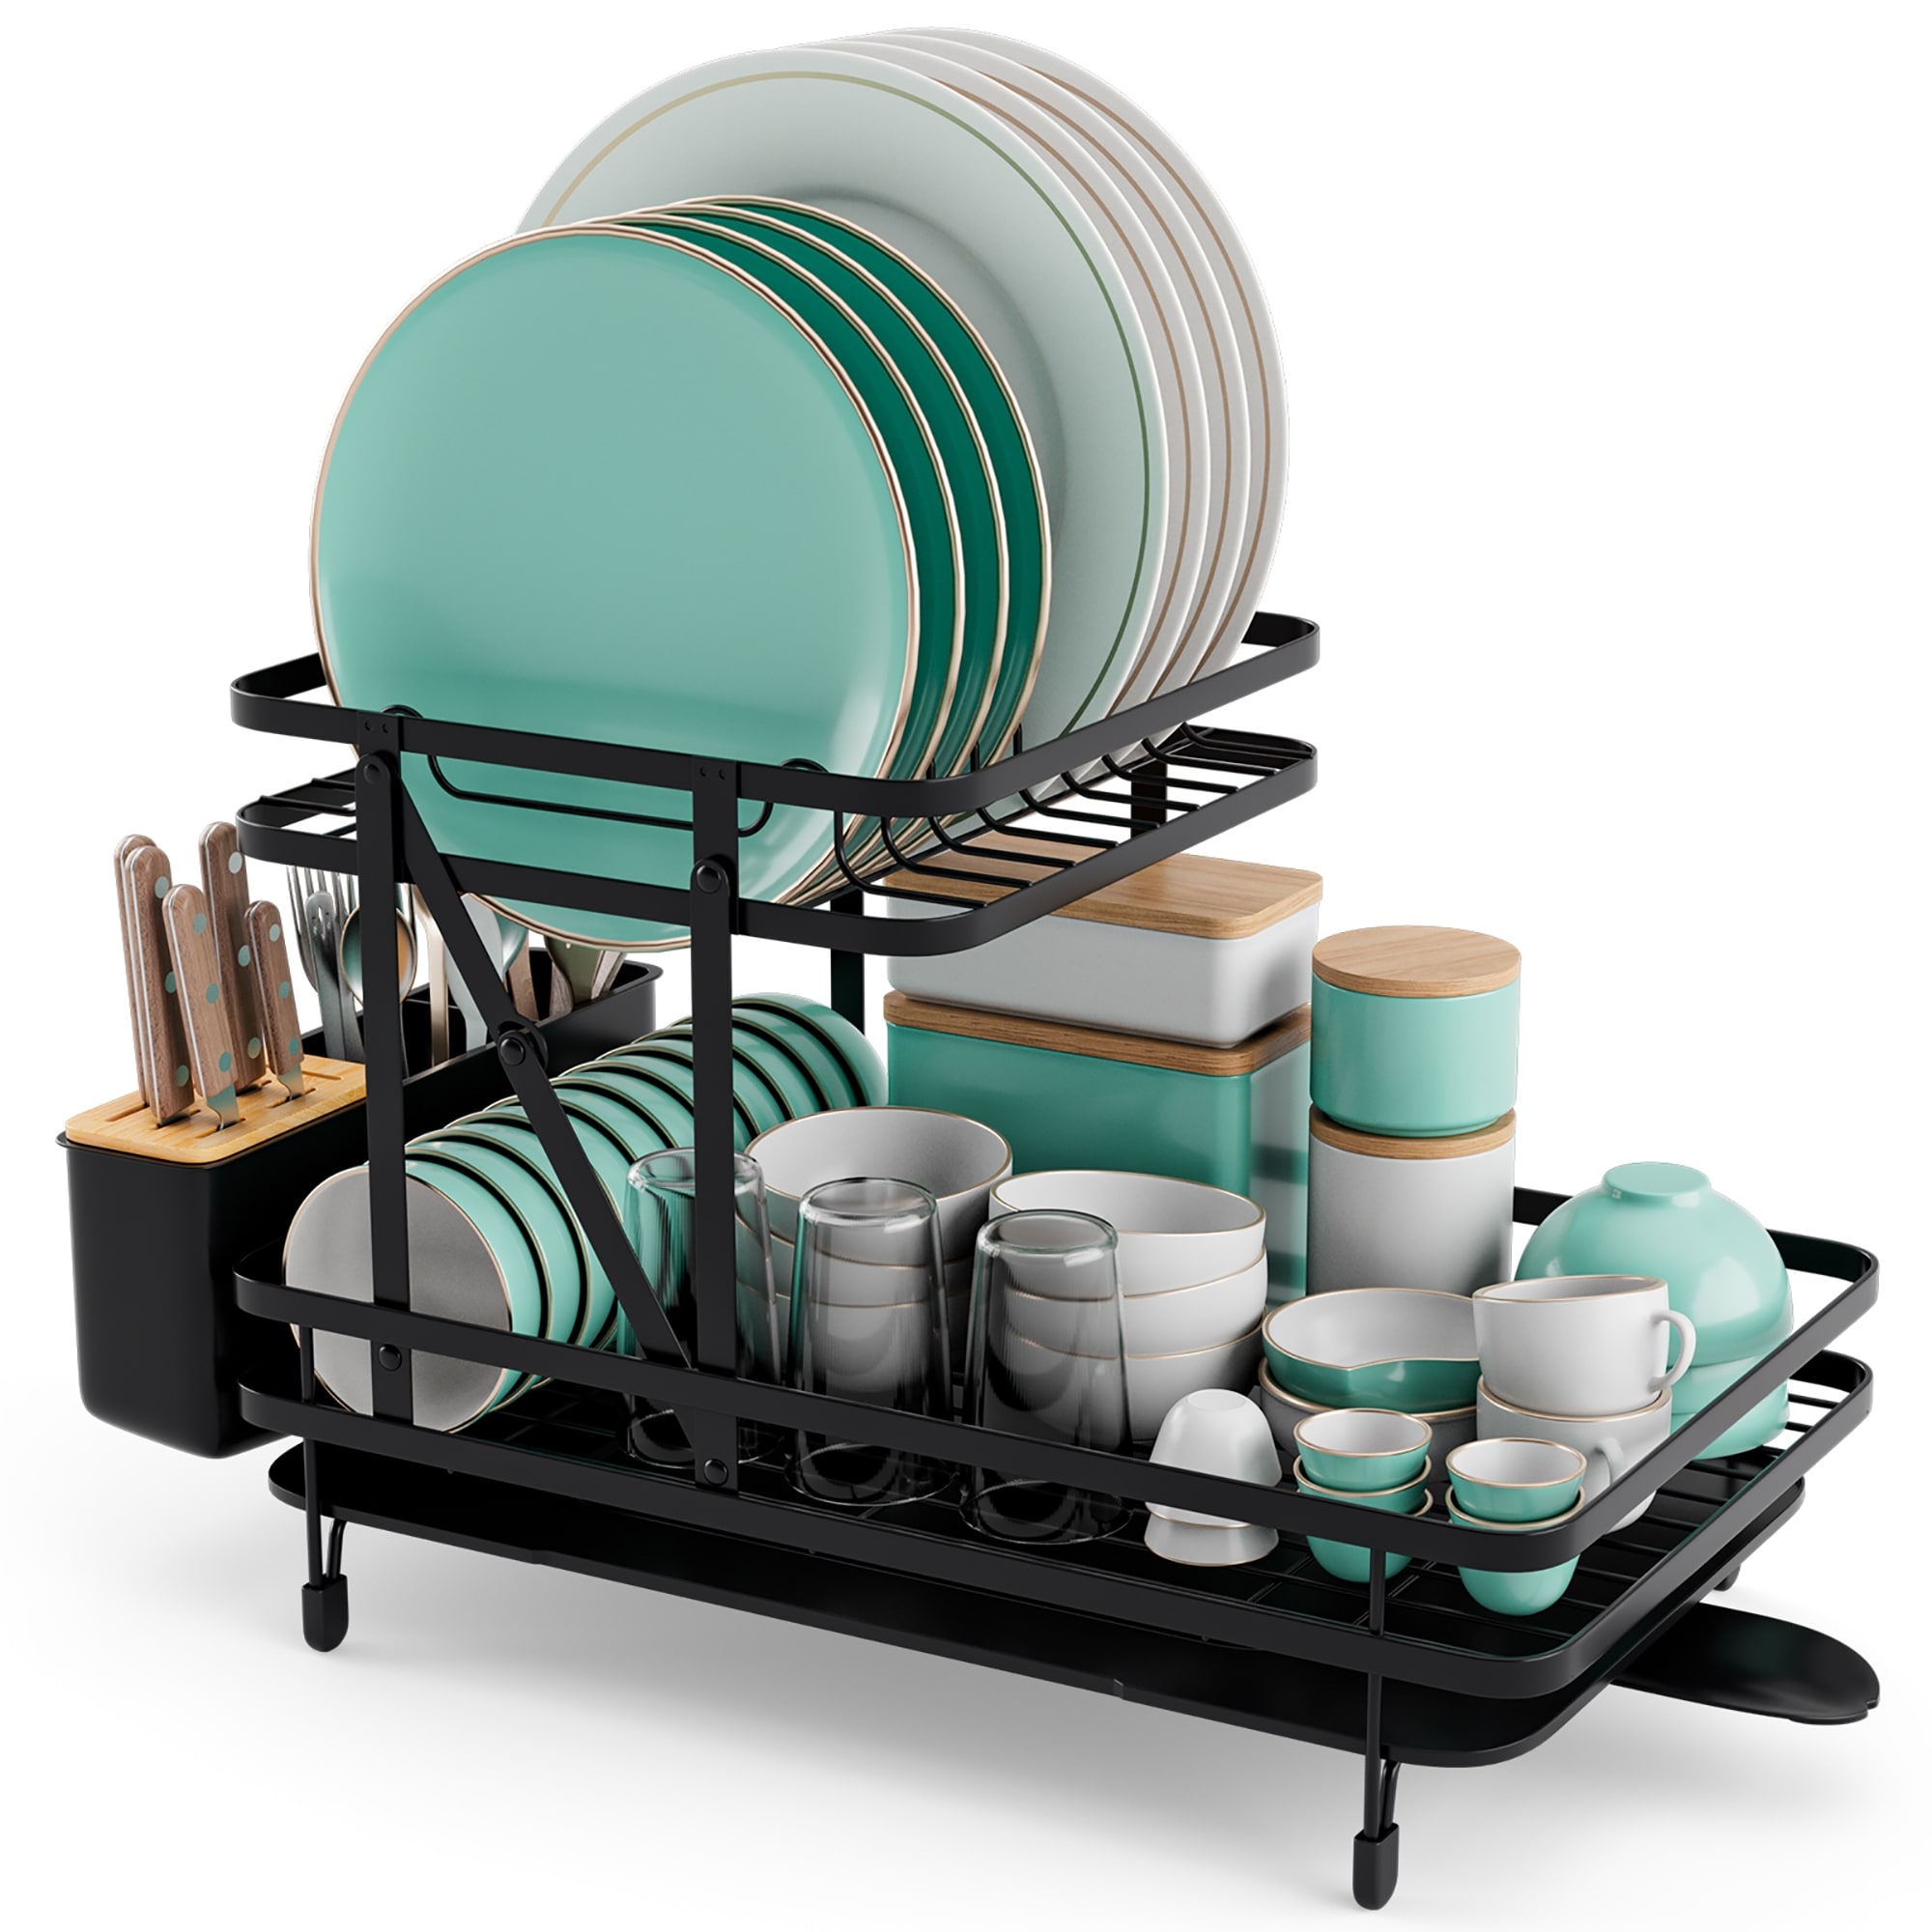 https://ak1.ostkcdn.com/images/products/is/images/direct/a7cac0bc46b291e7b602d438415e3031531fe1dd/Dish-Drying-Rack-Collapsible-2-Tier-Dish-Rack-and-Drainboard-Set.jpg